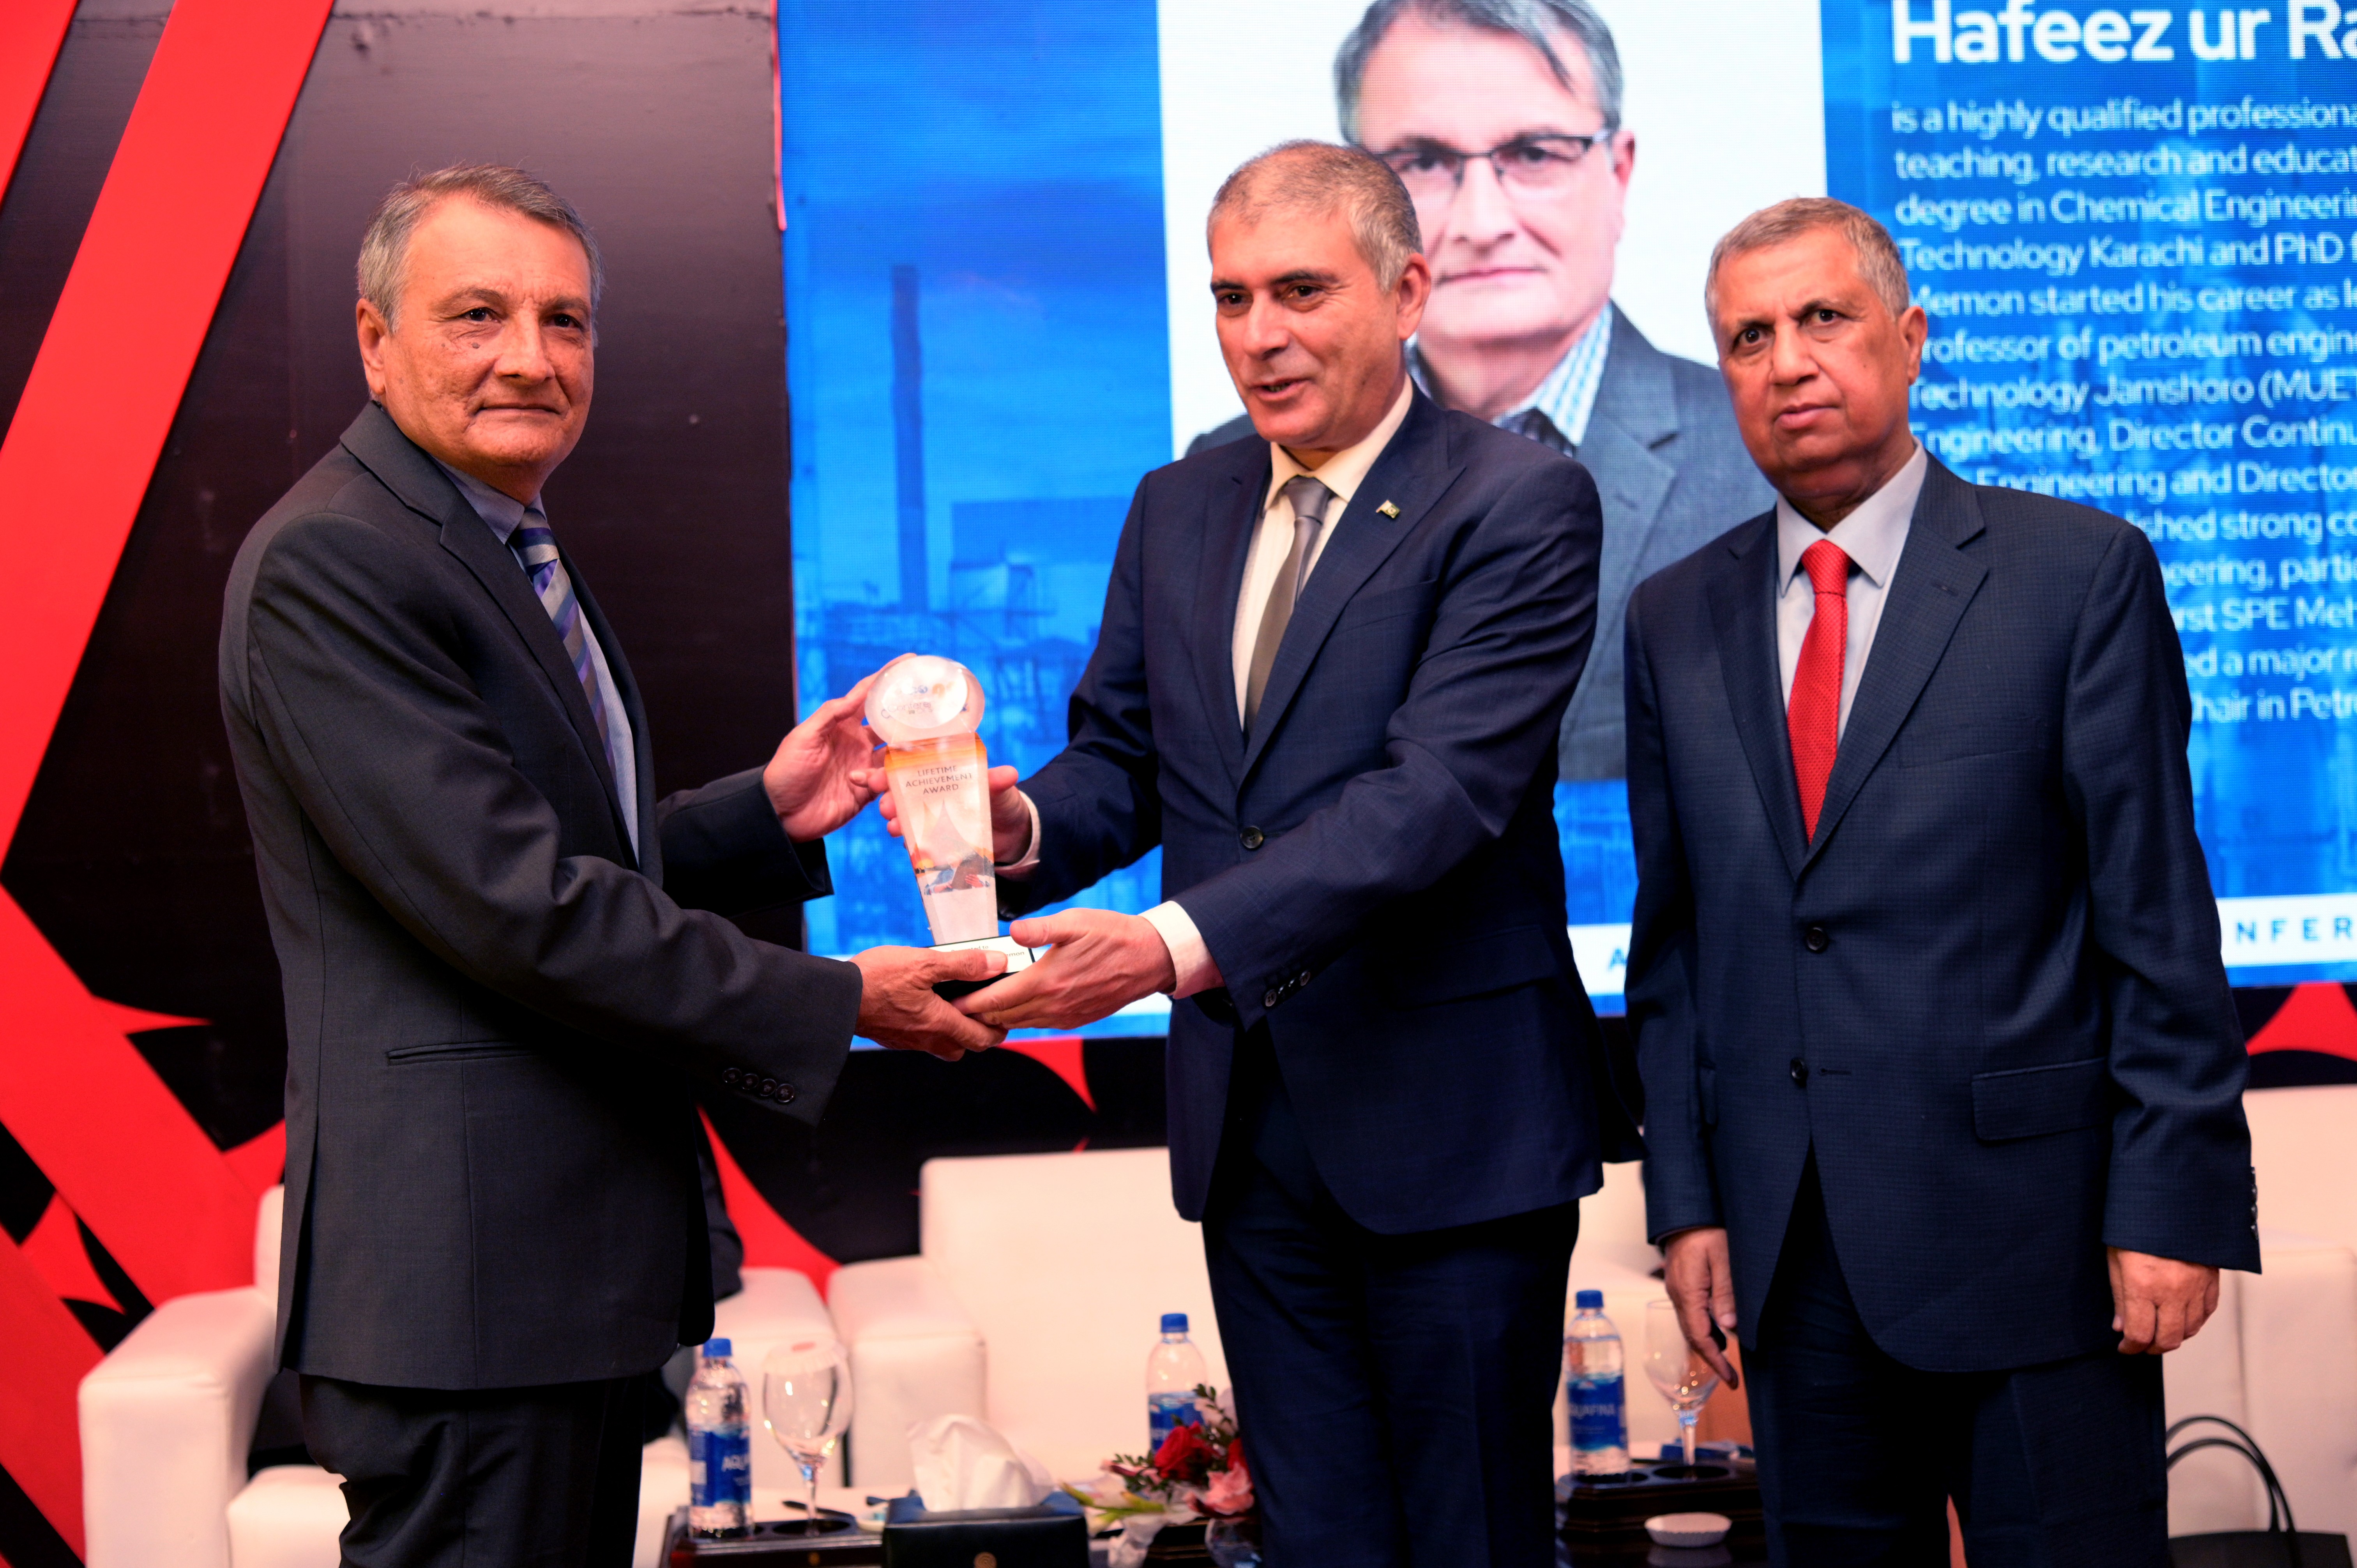 Shields distribution ceremony to the participants at the event of conference and oil show